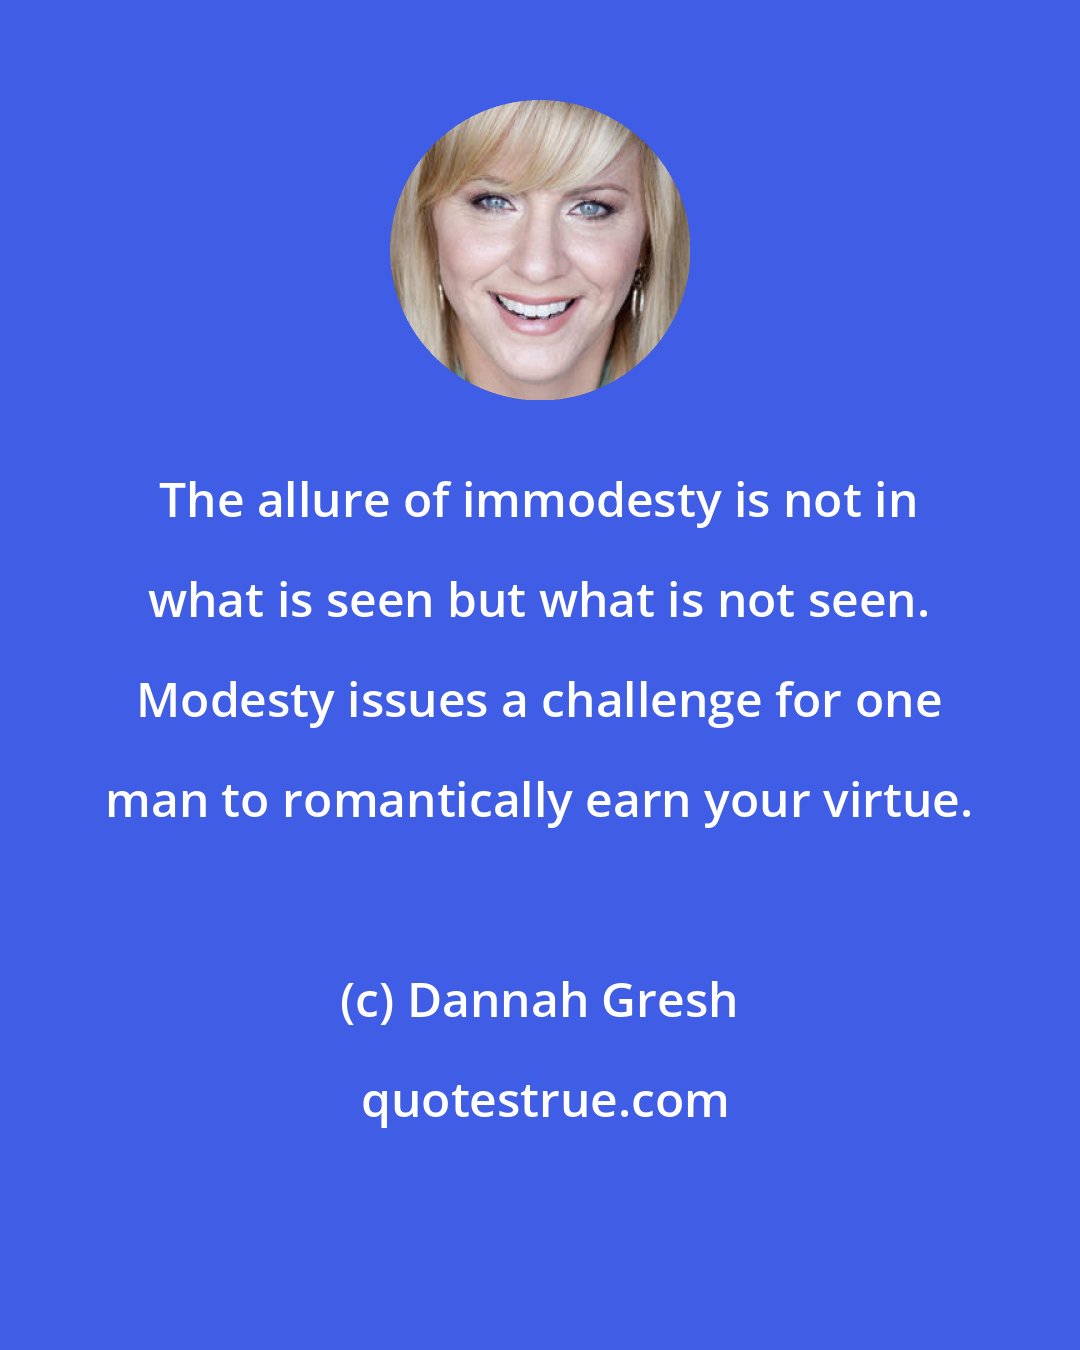 Dannah Gresh: The allure of immodesty is not in what is seen but what is not seen. Modesty issues a challenge for one man to romantically earn your virtue.